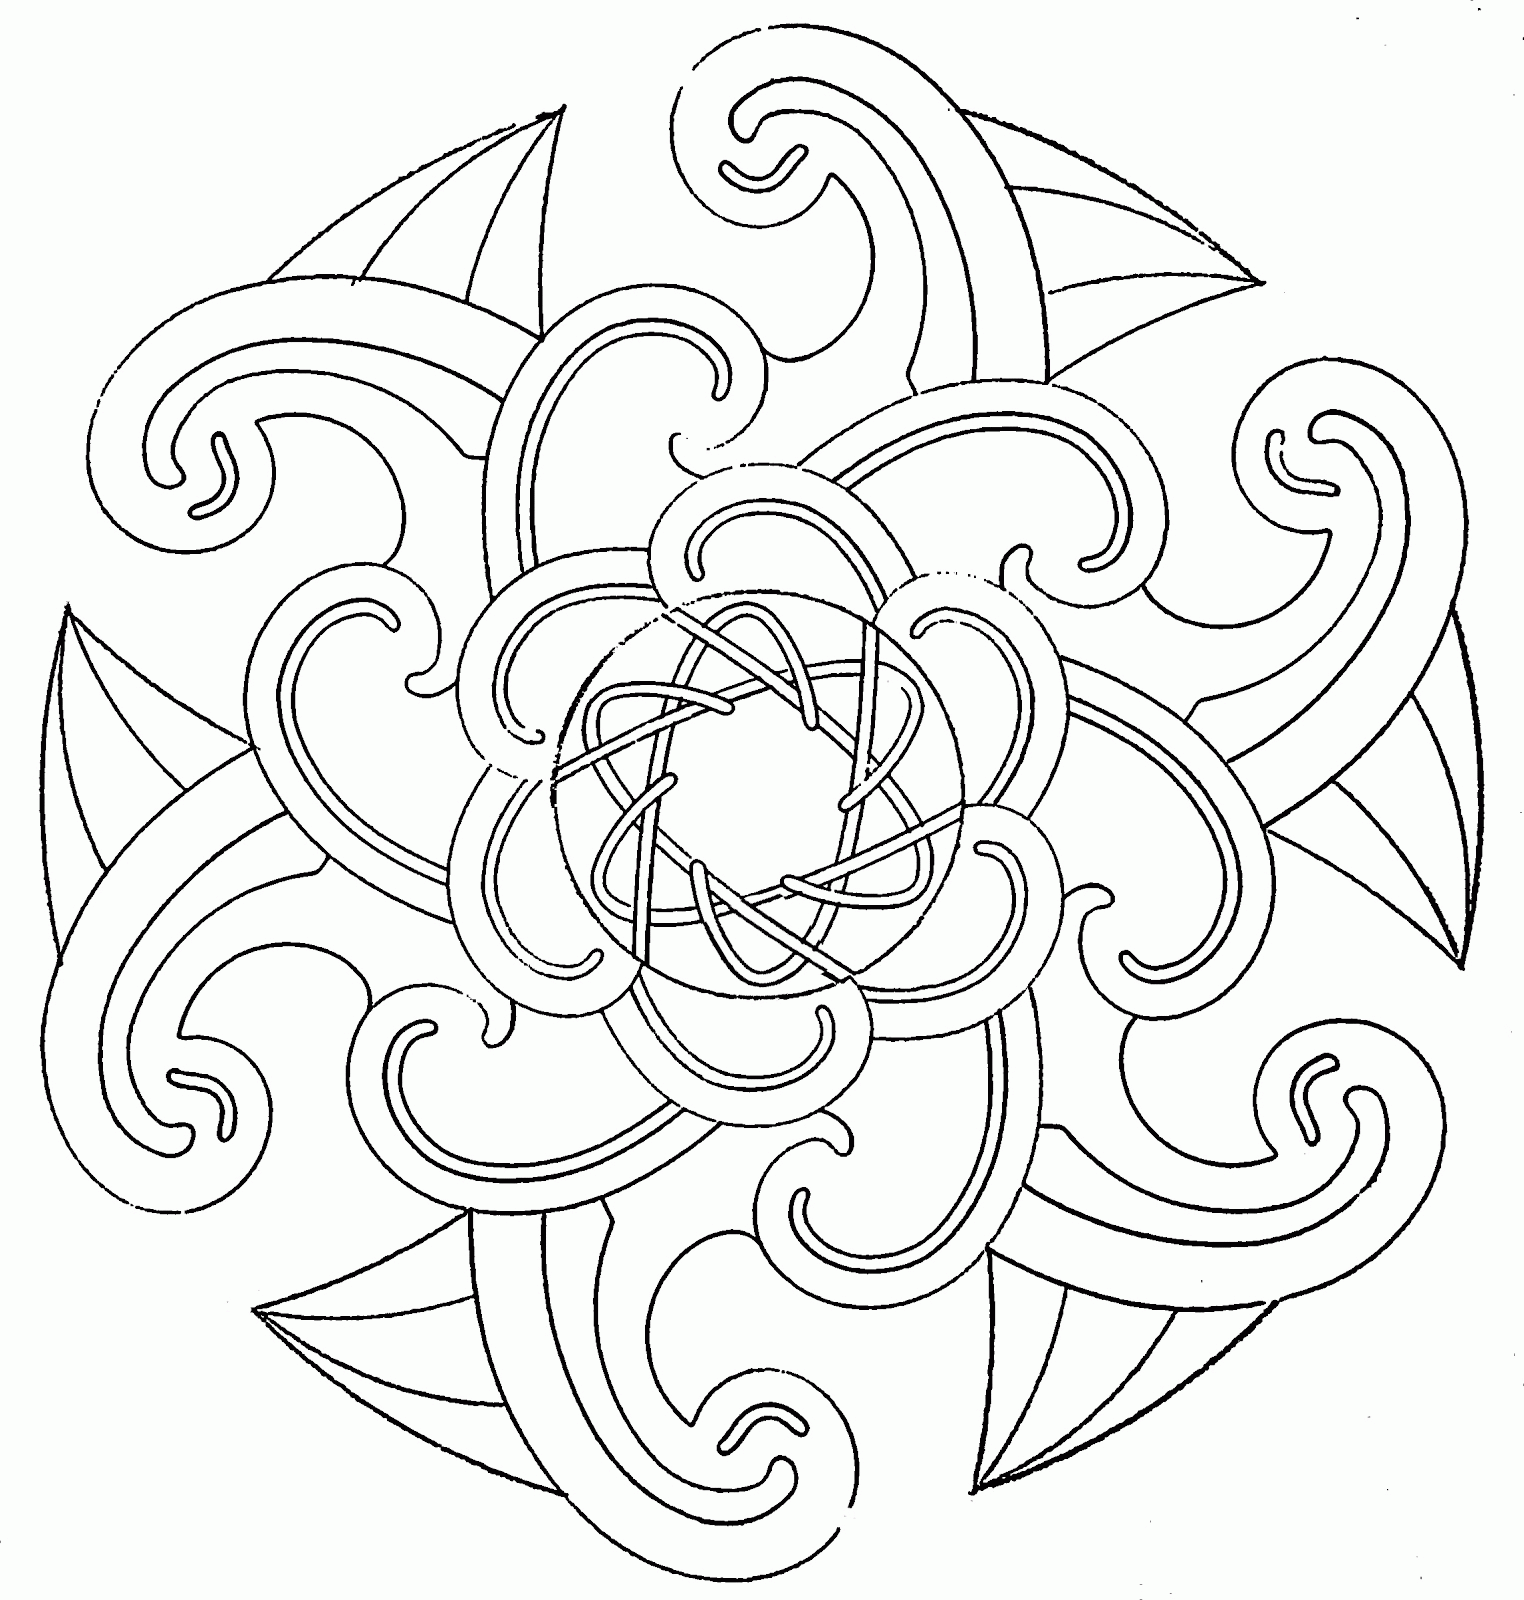 really cool coloring pages to print printable cool coloring pages designs coloring home print really cool coloring to pages 